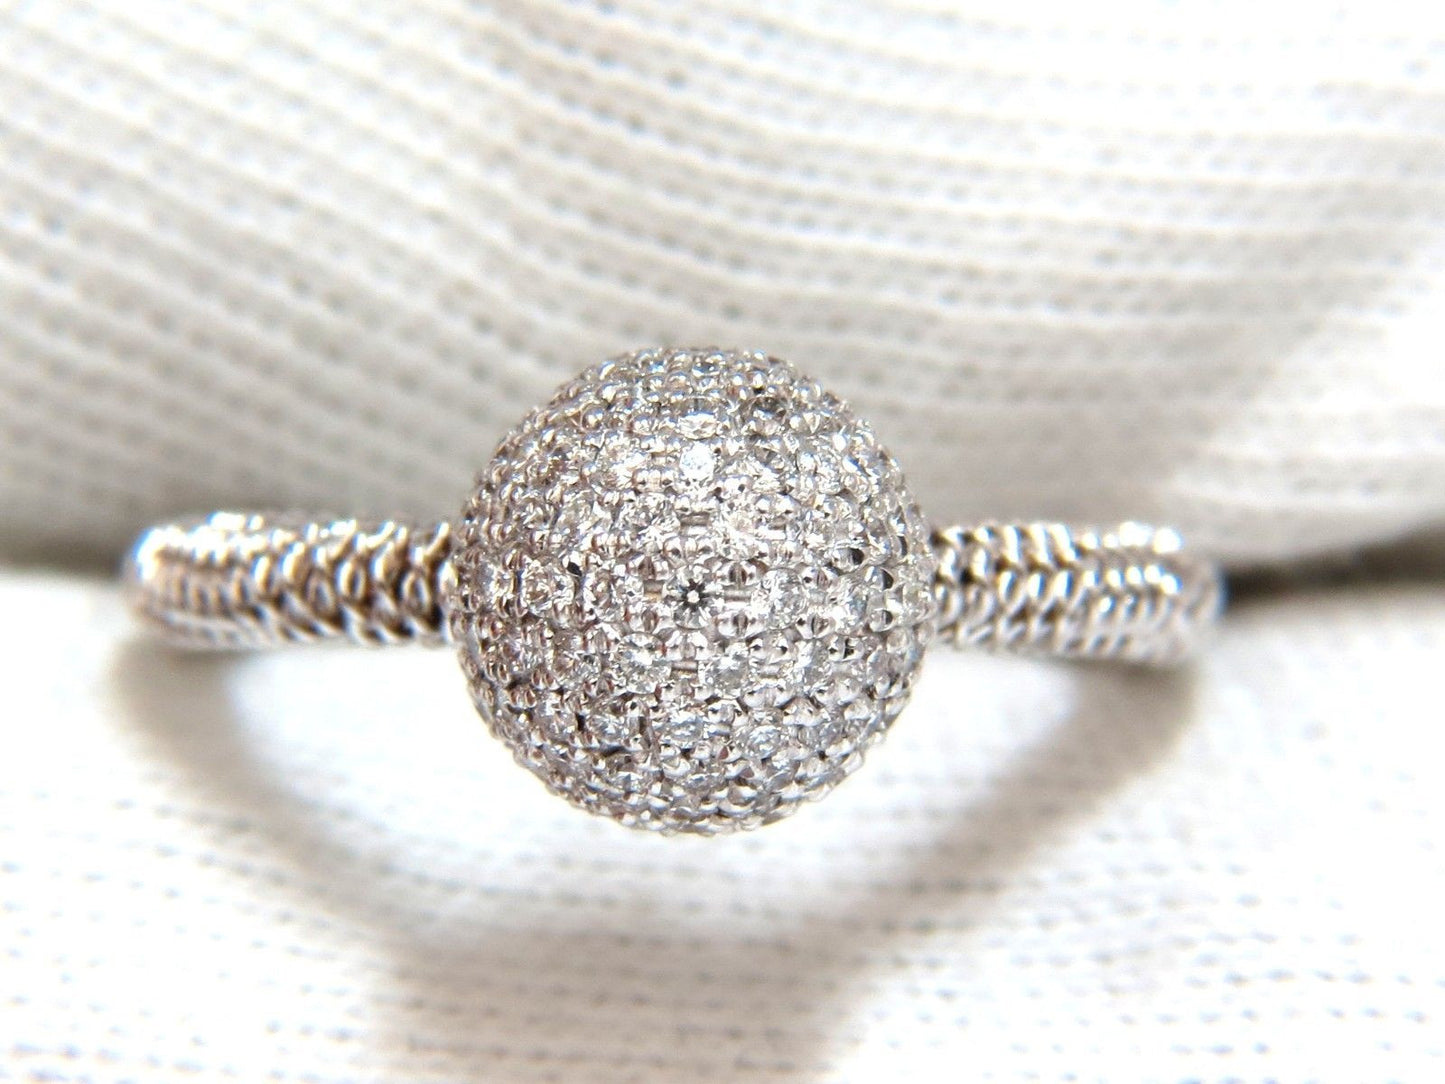 .76ct diamonds bead set ball ring 18kt + coil wire wrapped shank g/vs